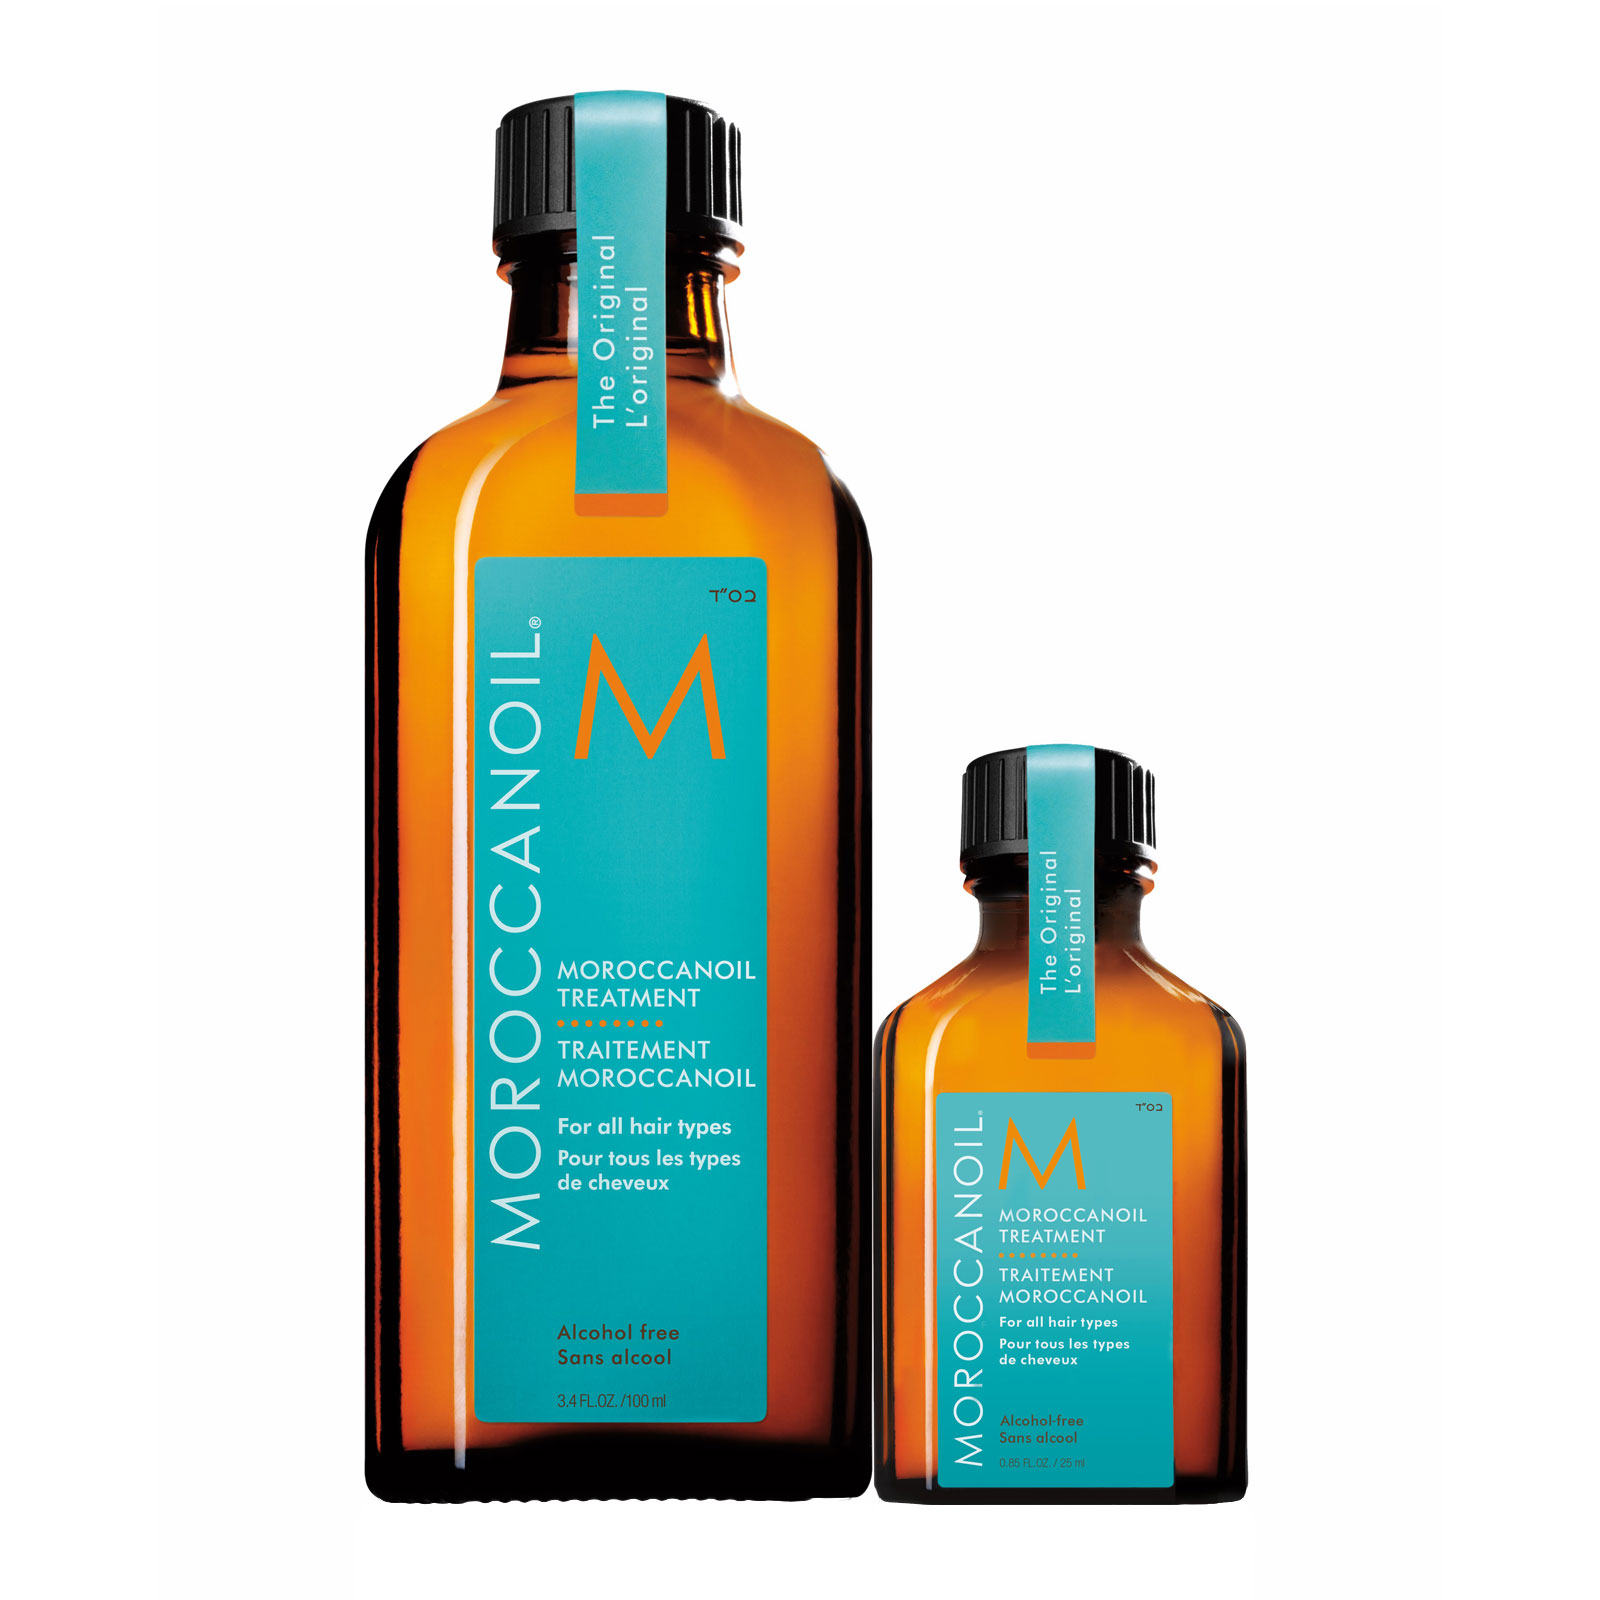 Moroccanoil Be an Original Treatment 100ml with Free 25ml